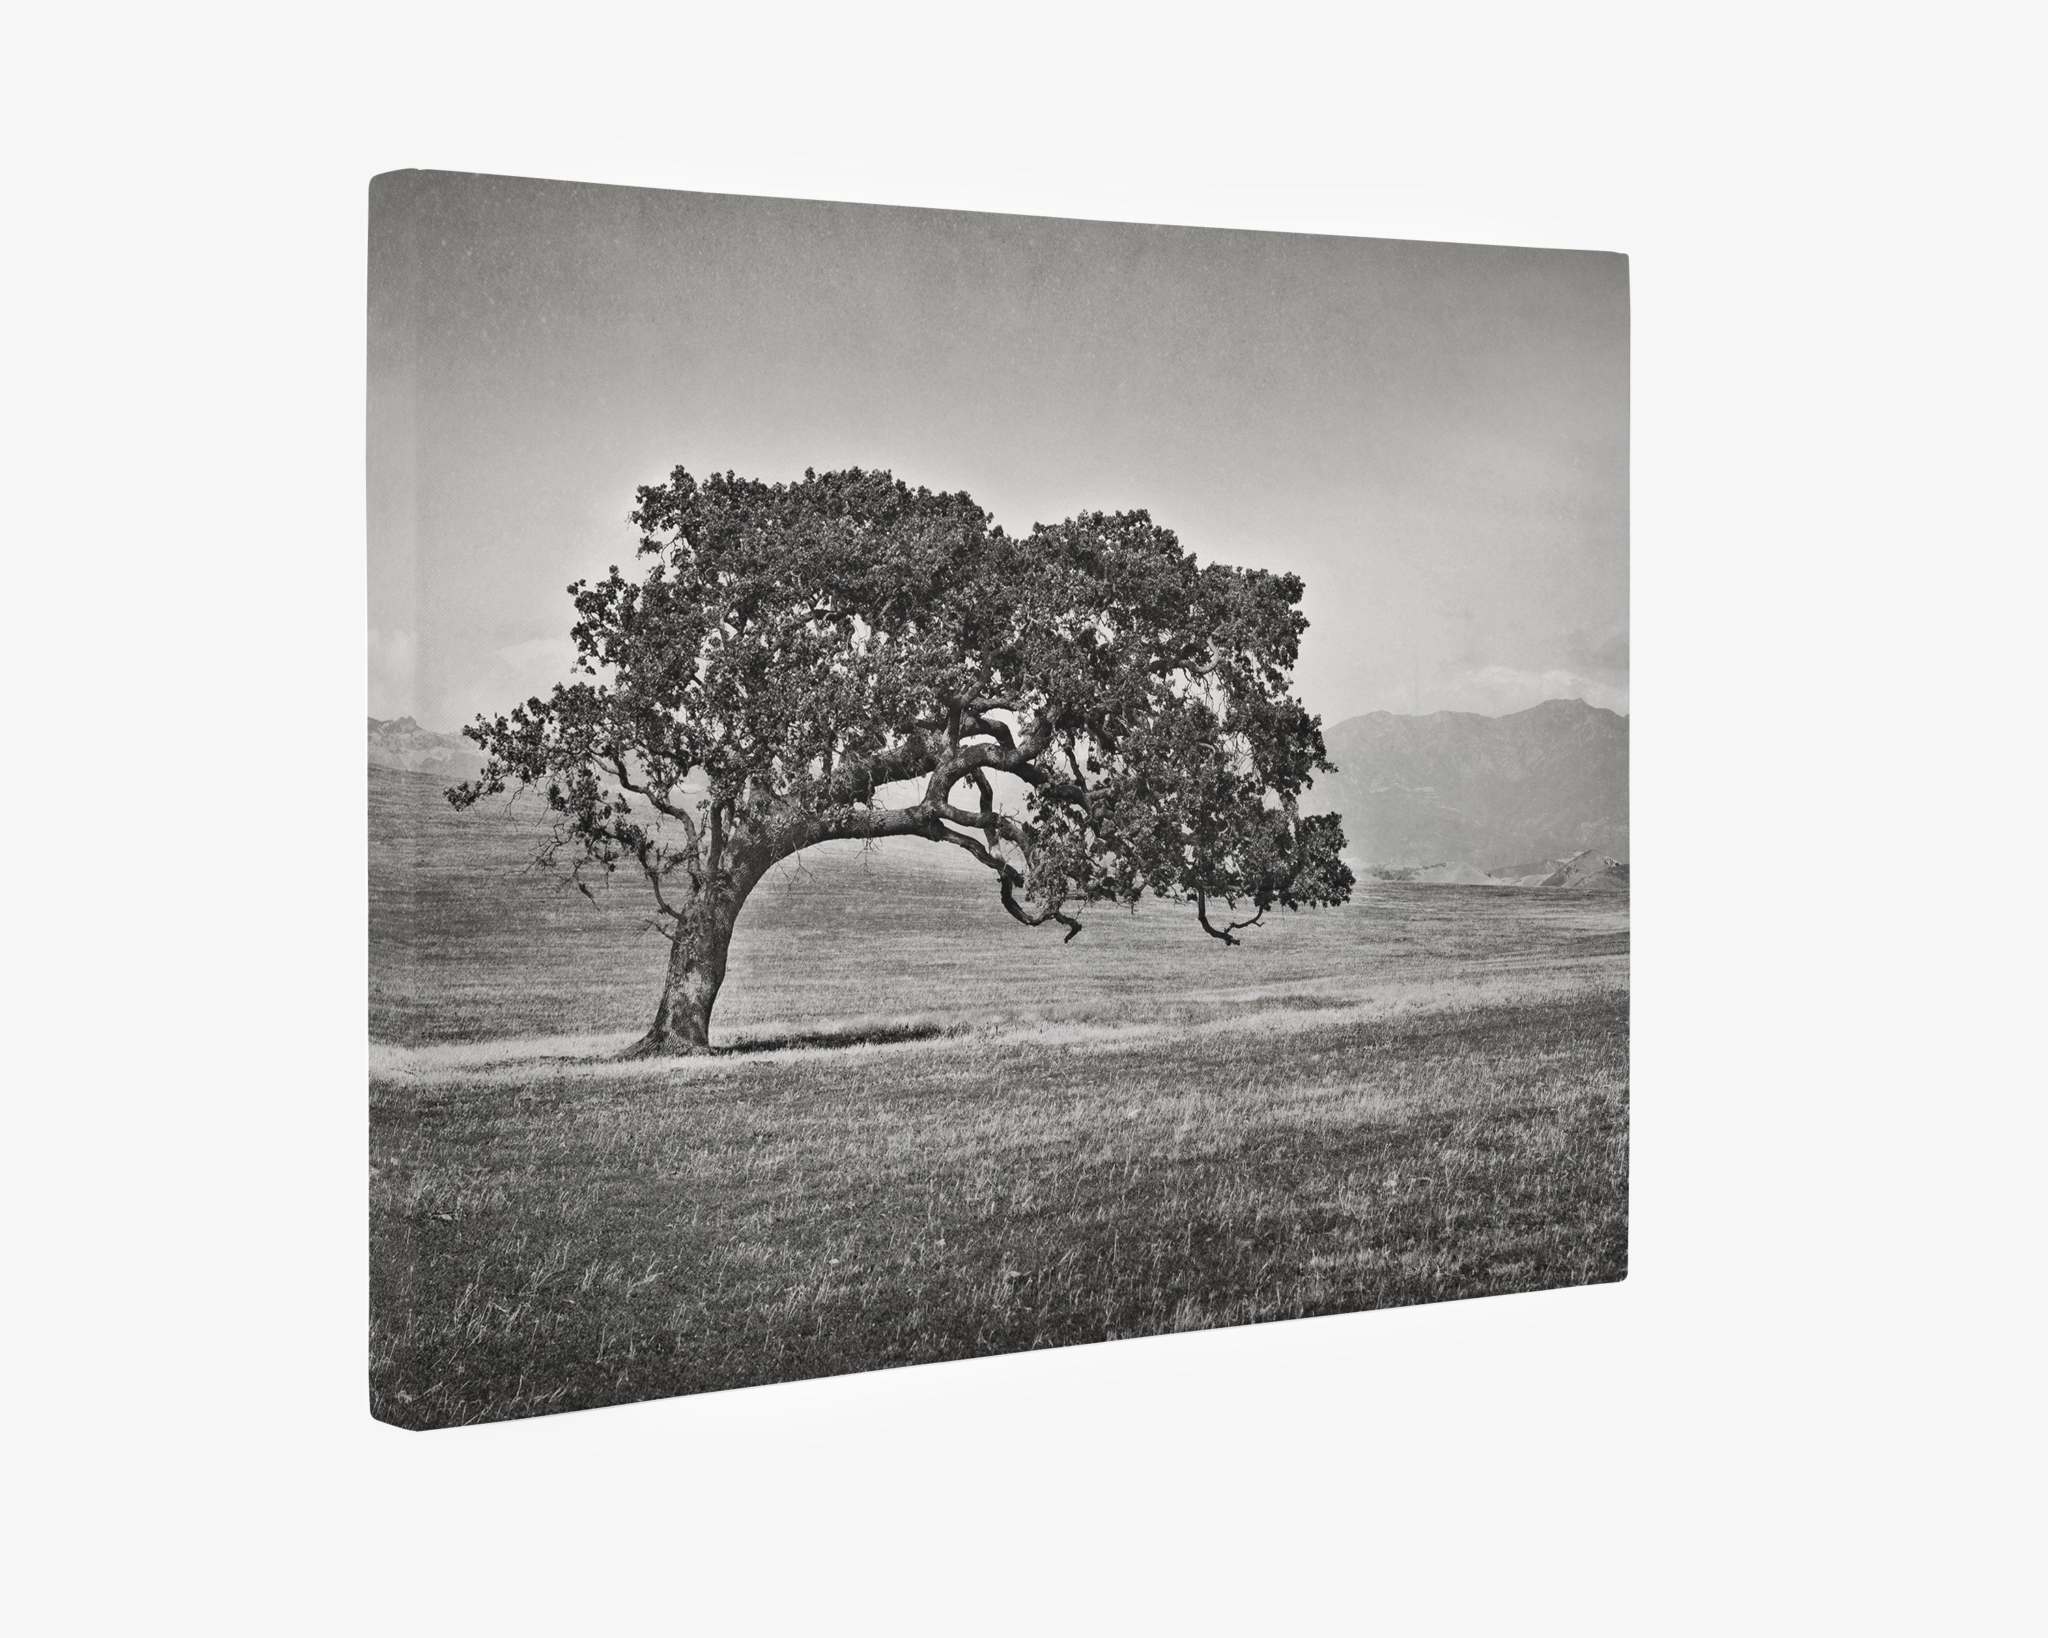 A black and white photograph showcases a solitary, sprawling California Oak with twisted branches in an open field. In the background, distant mountains and a hazy sky complete the tranquil landscape. This ready-to-hang piece is presented on a slightly curved canvas gallery wrap: the Californian Oak Tree Landscape Canvas, 'Windswept (Black and White)' by Offley Green.